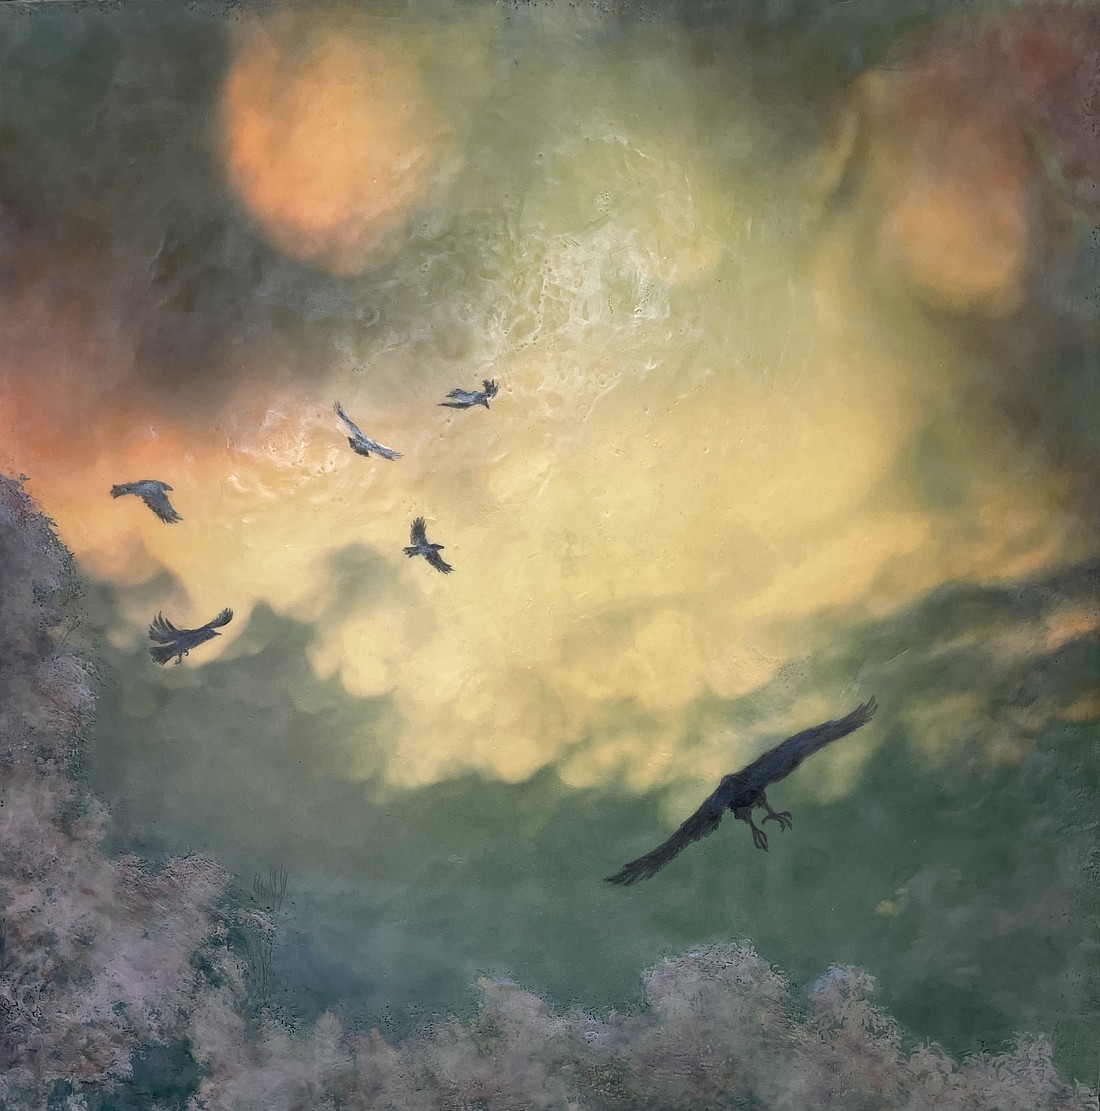 In Mount Vernon, “Hem of Heaven” is the title of an exhibition of the realist work of artist Catherine Eaton Skinner at Perry and Carlson Gallery. In the painting “Lungi Kam XVI” a half-dozen ravens celebrate a sensuous sky dominated by two hypnotic, rosy orbs.